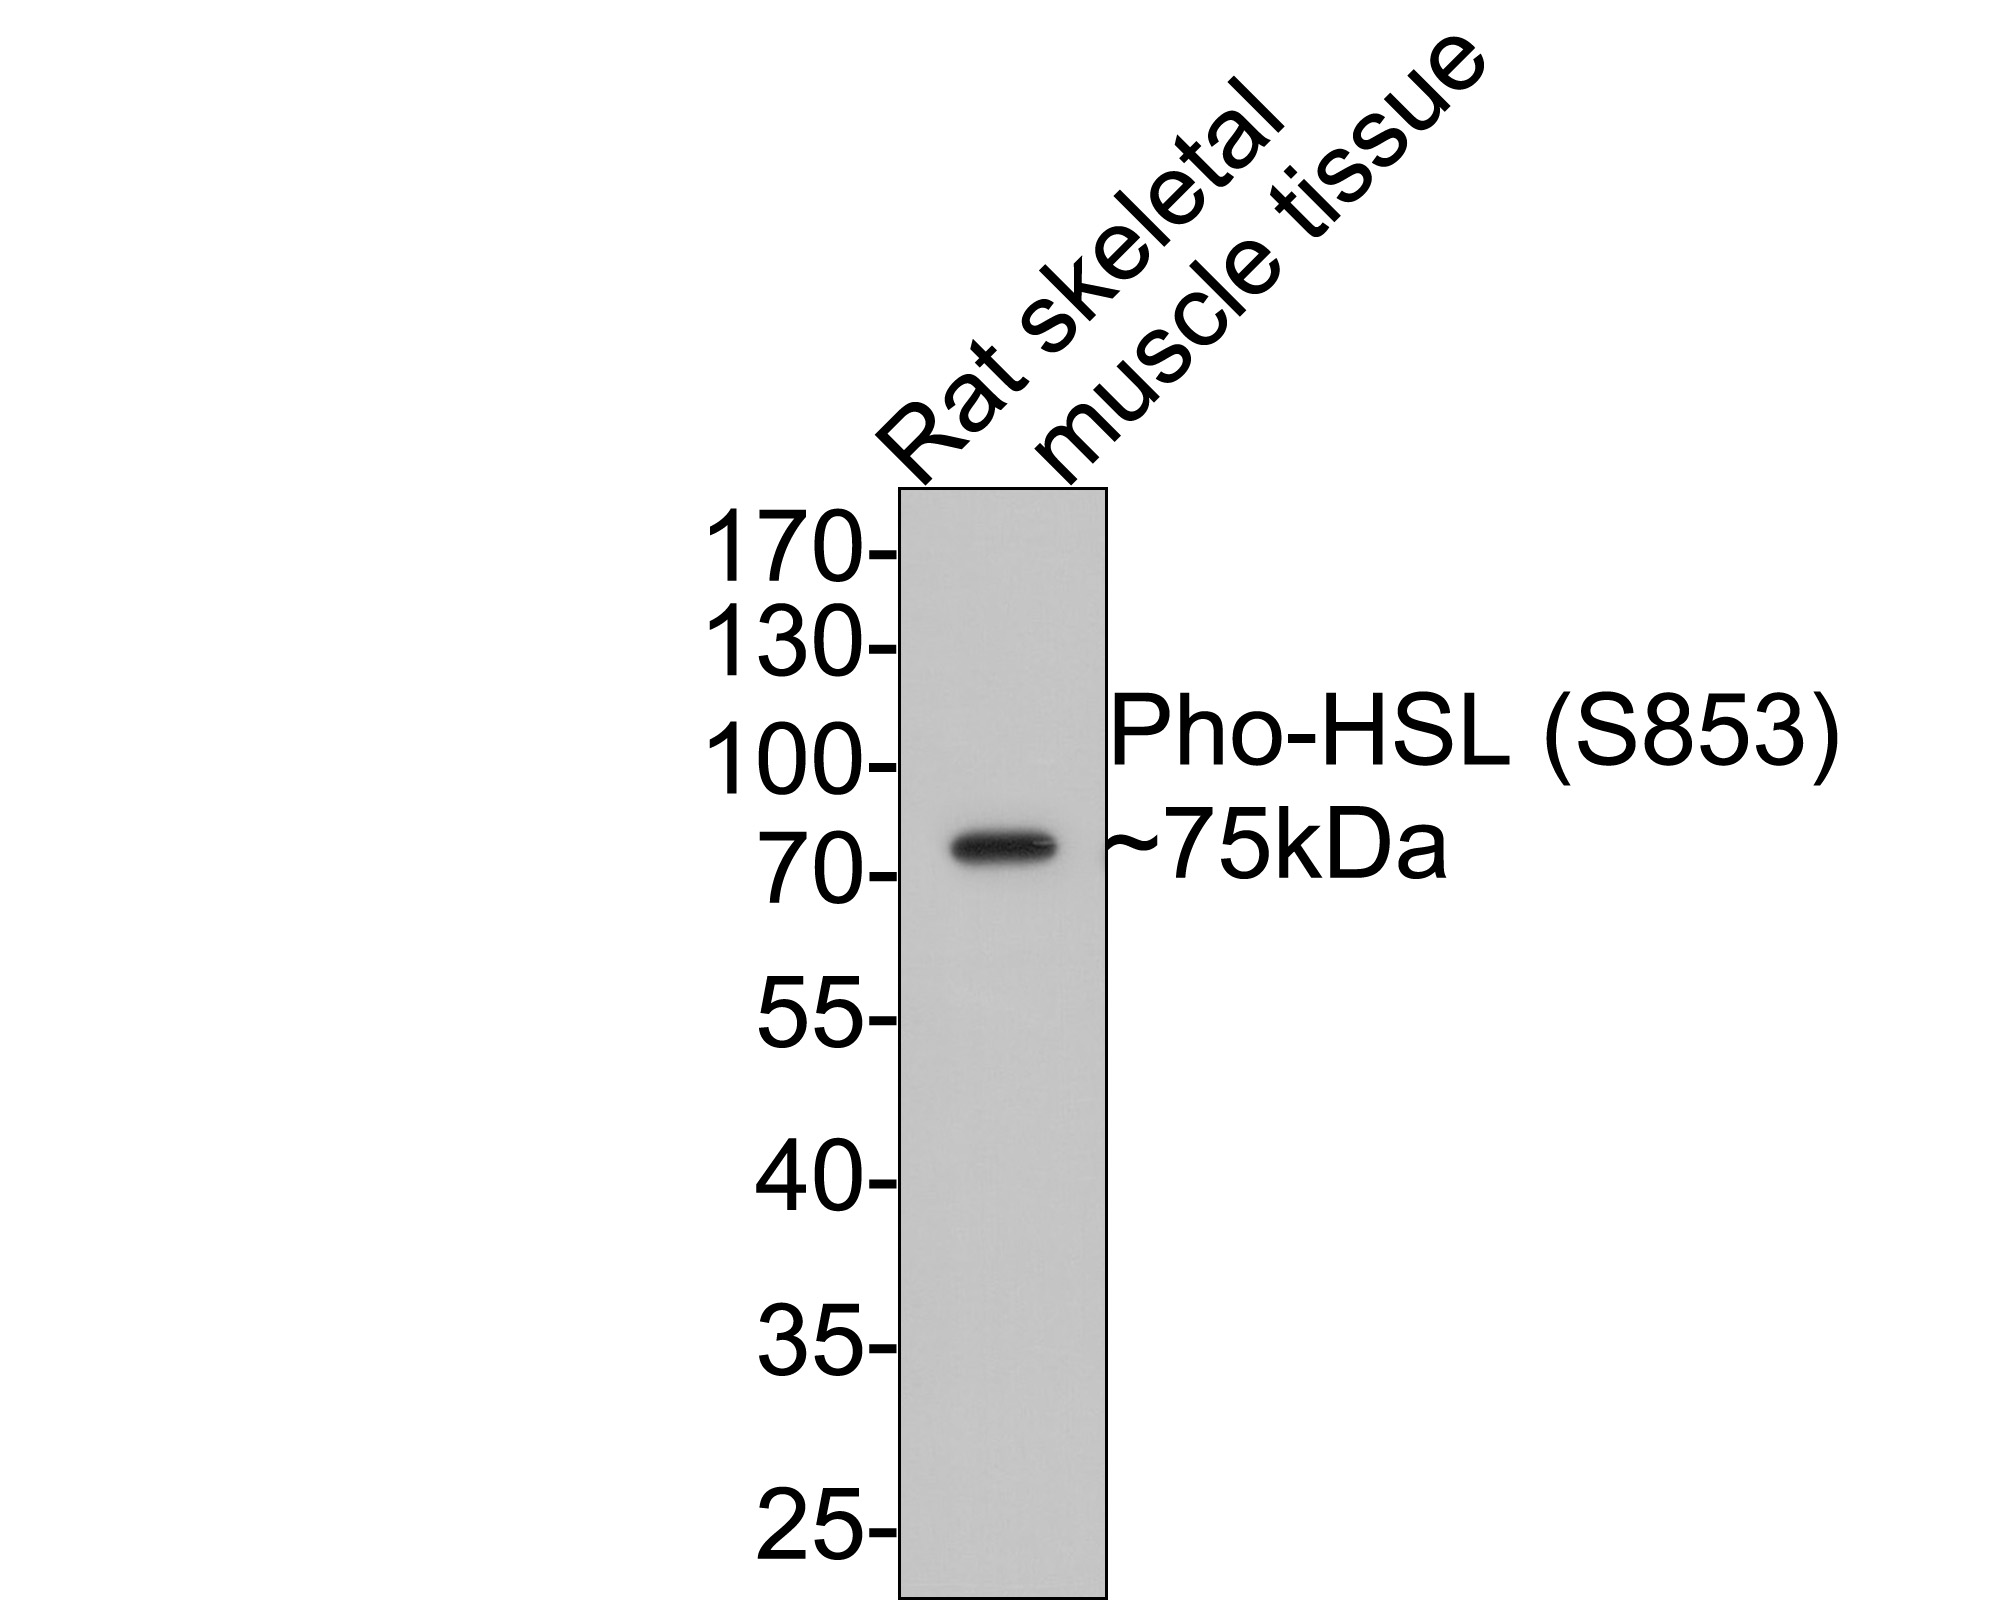 Western blot analysis of Phospho-Hormone sensitive lipase (S853) on rat skeletal muscle tissue lysates with Rabbit anti-Phospho-Hormone sensitive lipase (S853) antibody (ET1611-19) at 1/2,000 dilution.<br />
<br />
Lysates/proteins at 10 µg/Lane.<br />
<br />
Predicted band size: 117 kDa<br />
Observed band size: 75 kDa<br />
<br />
Exposure time: 1 minute;<br />
<br />
10% SDS-PAGE gel.<br />
<br />
Proteins were transferred to a PVDF membrane and blocked with 5% NFDM/TBST for 1 hour at room temperature. The primary antibody (ET1611-19) at 1/2,000 dilution was used in 5% NFDM/TBST at room temperature for 2 hours. Goat Anti-Rabbit IgG - HRP Secondary Antibody (HA1001) at 1:300,000 dilution was used for 1 hour at room temperature.